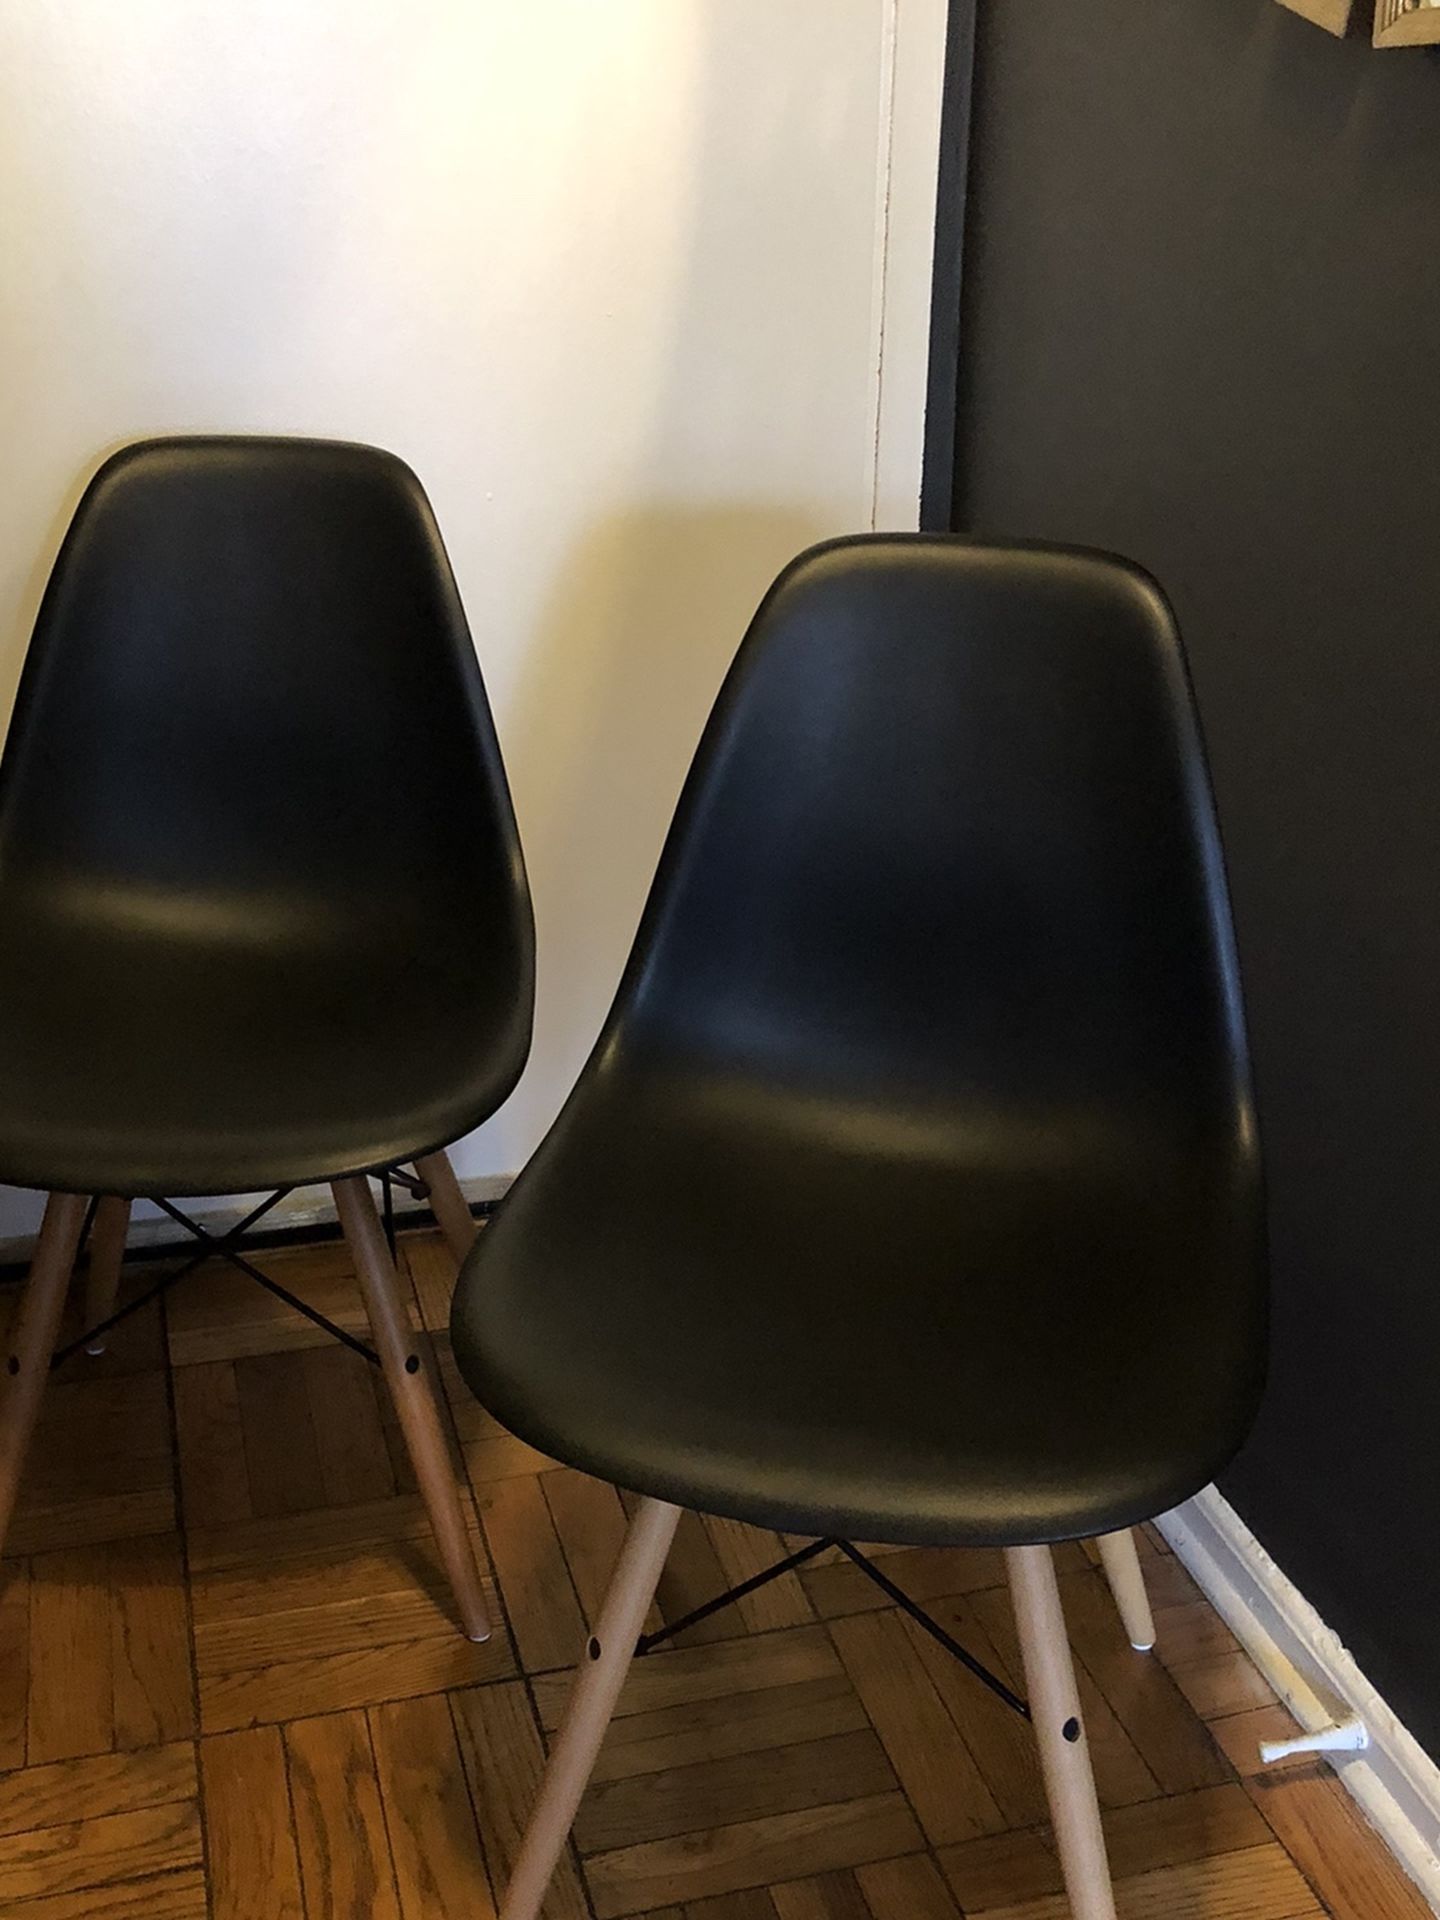 Pair of Mid Century Modern-style Chairs